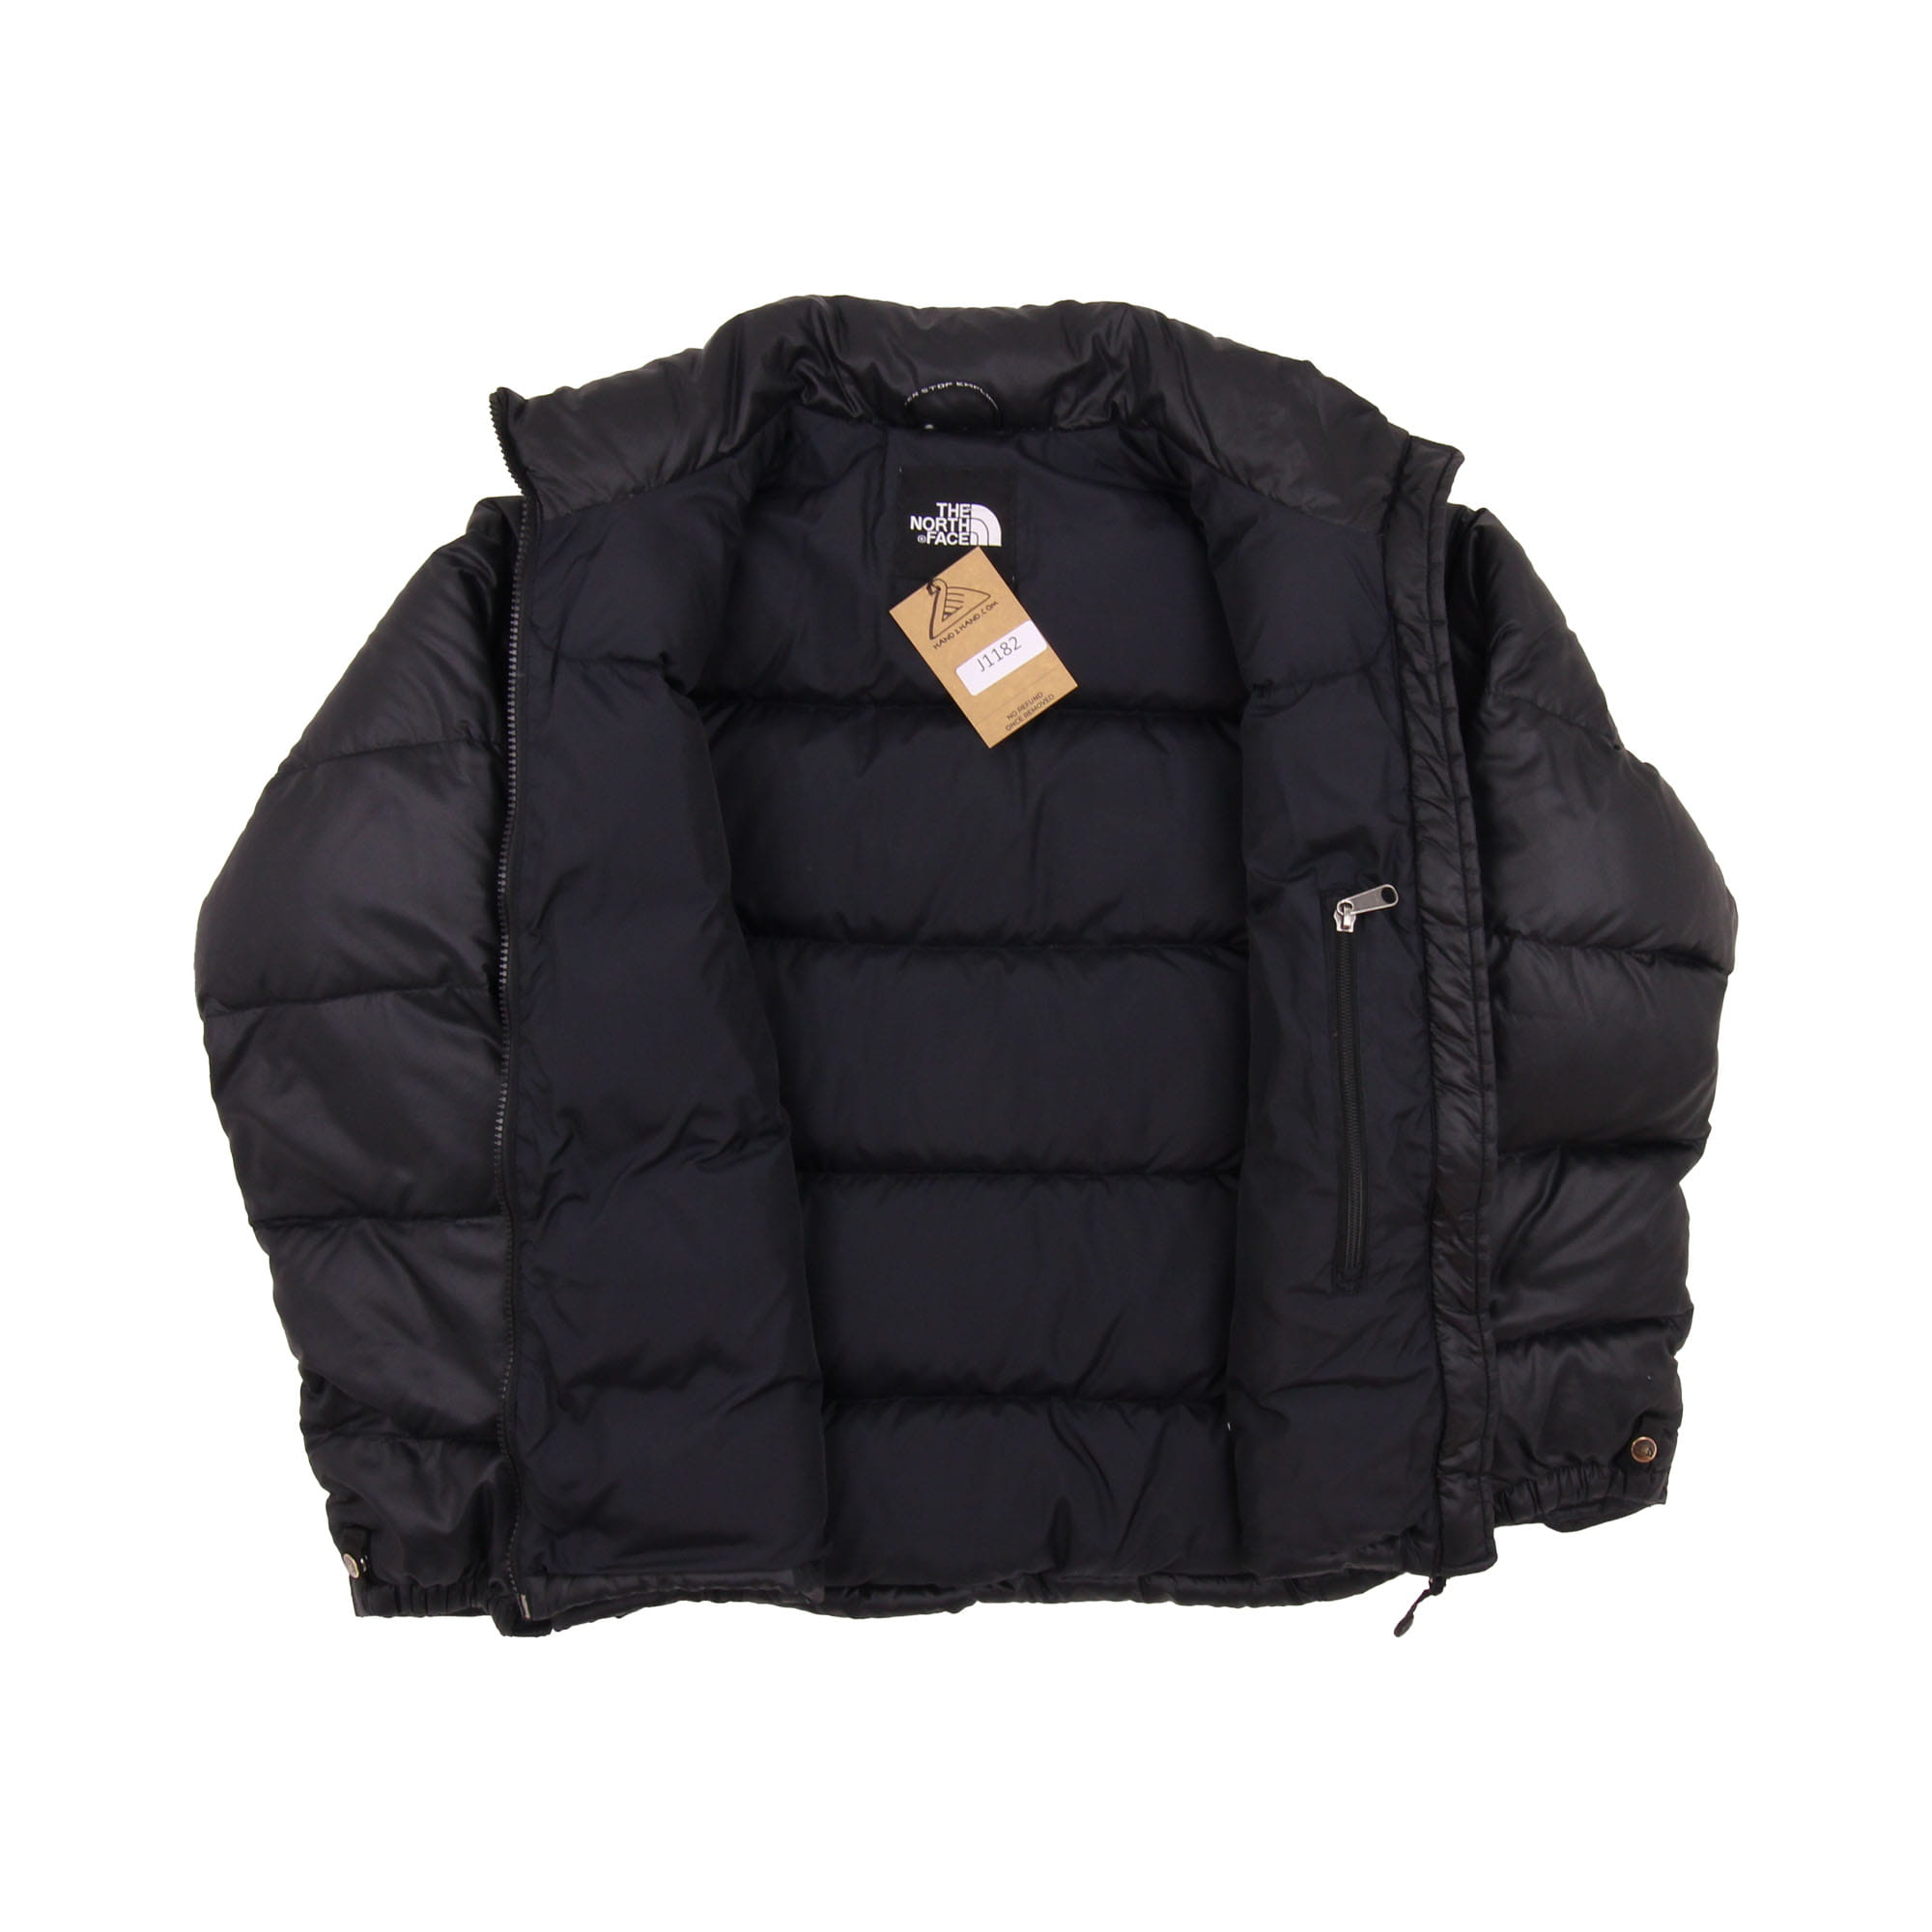 The North Face 700 Puffer Jacket Black -  S